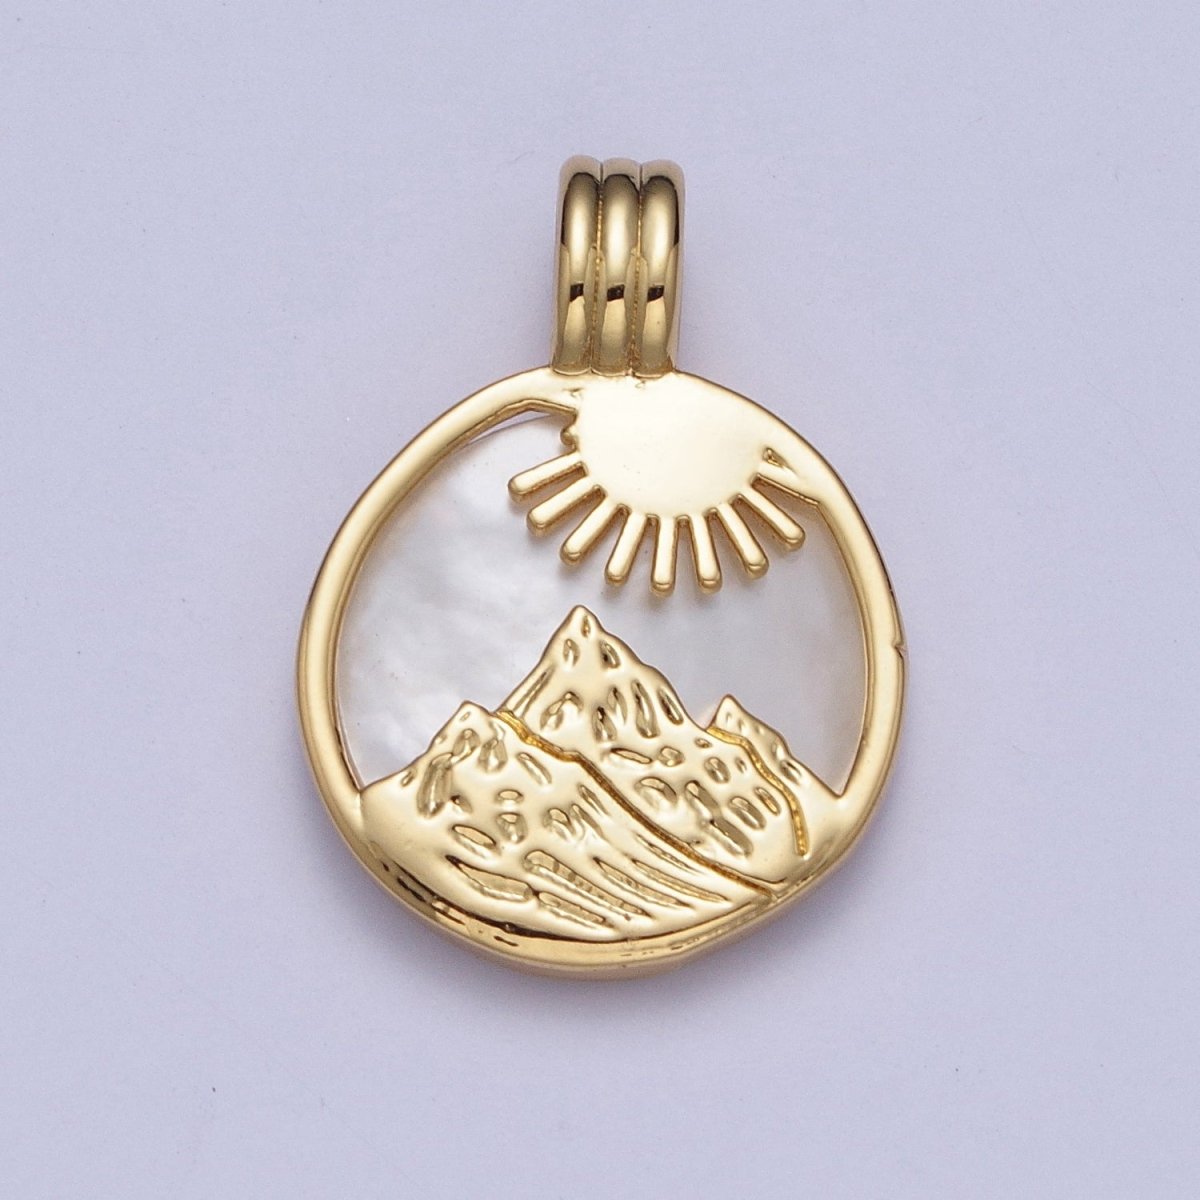 Pearl Collection Gold Element Charm Fire Wind Earth Ocean Wave Charm 24K Gold Filled Medallion for Necklace Bracelet Supply X-402 - X-405 - DLUXCA